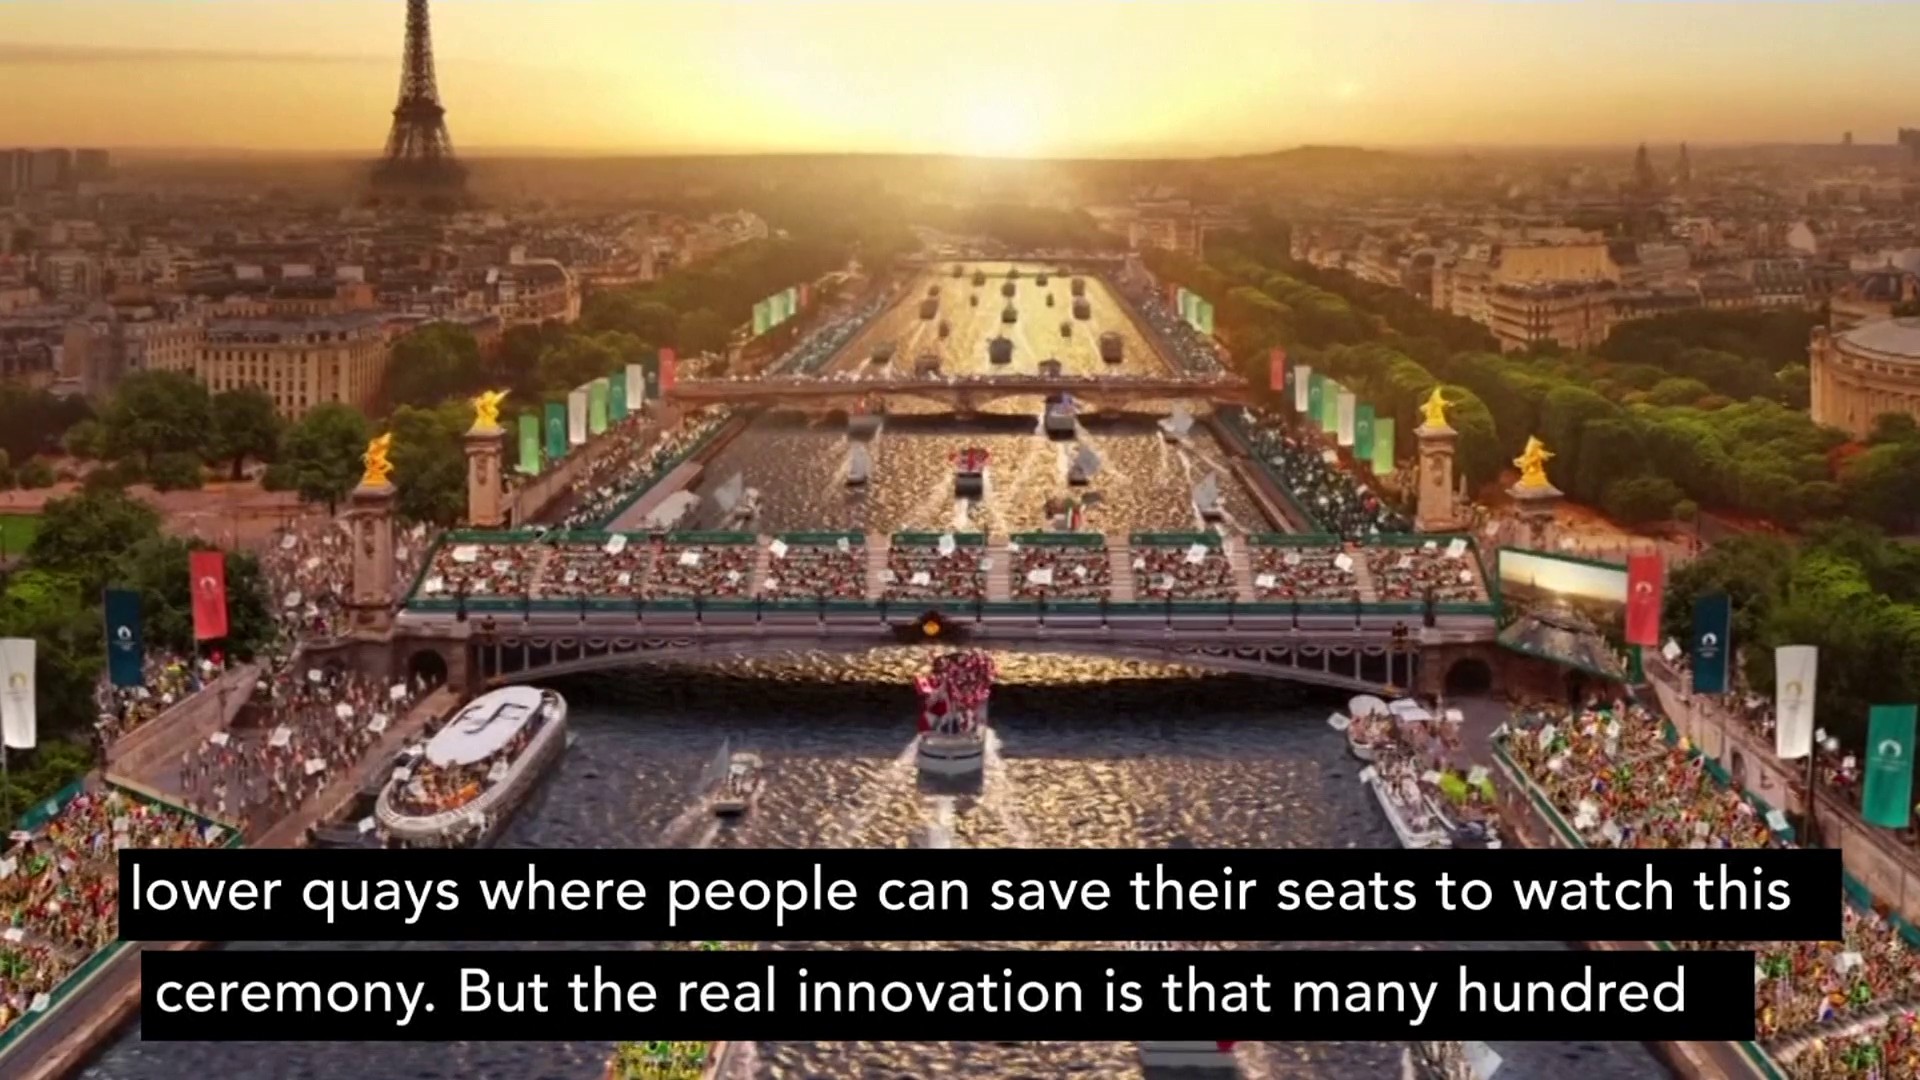 Paris 2024 Opening Ceremony on the River Seine -Plan revealed